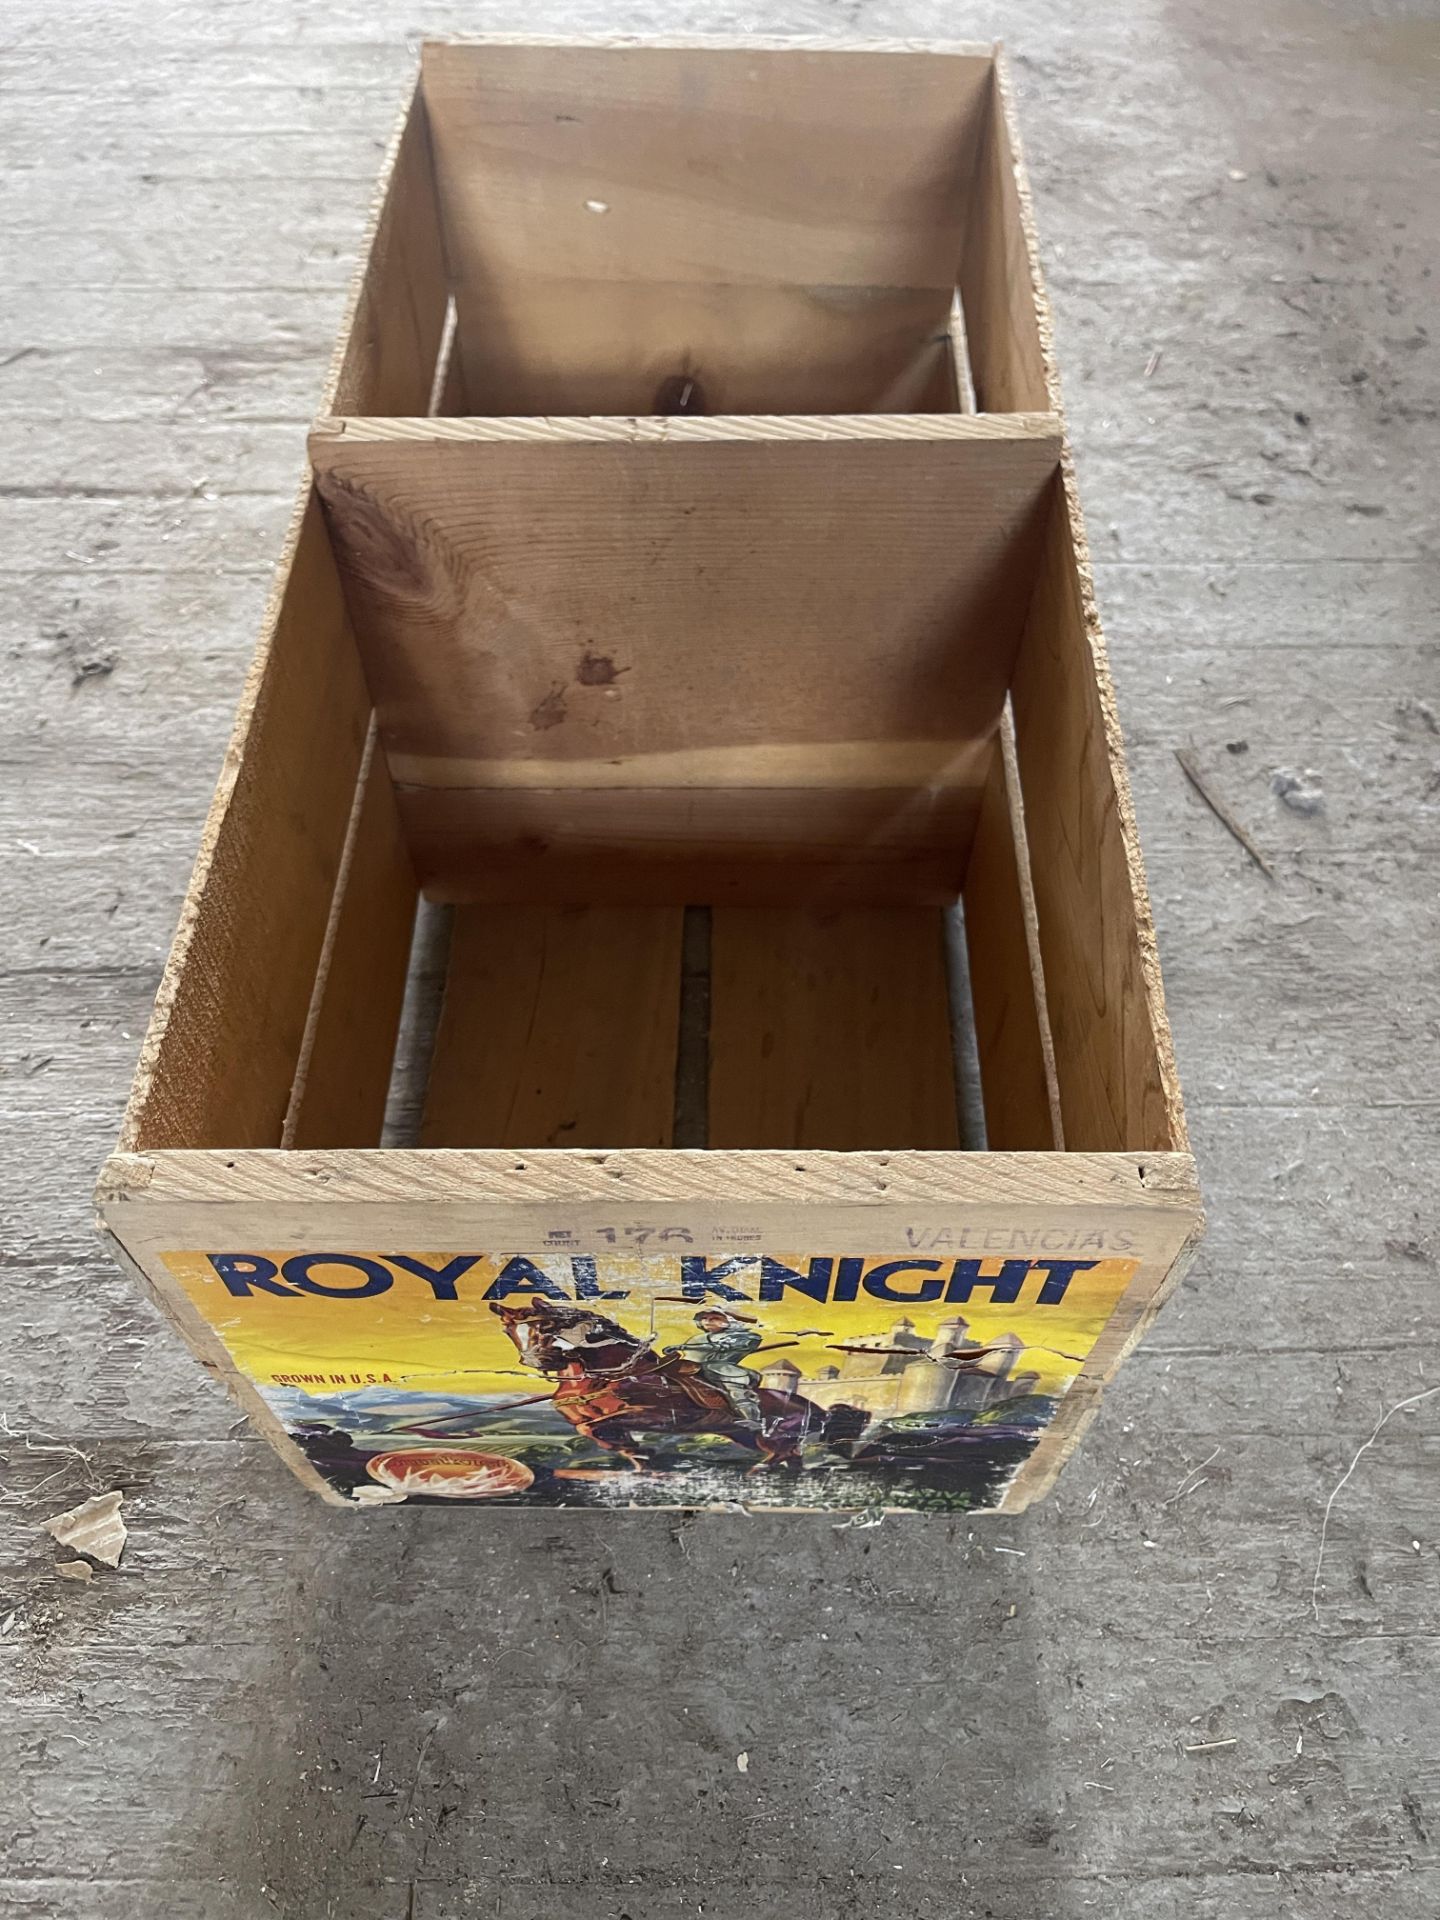 ANTIQUE ROYAL KNIGHT WOOD CRATE